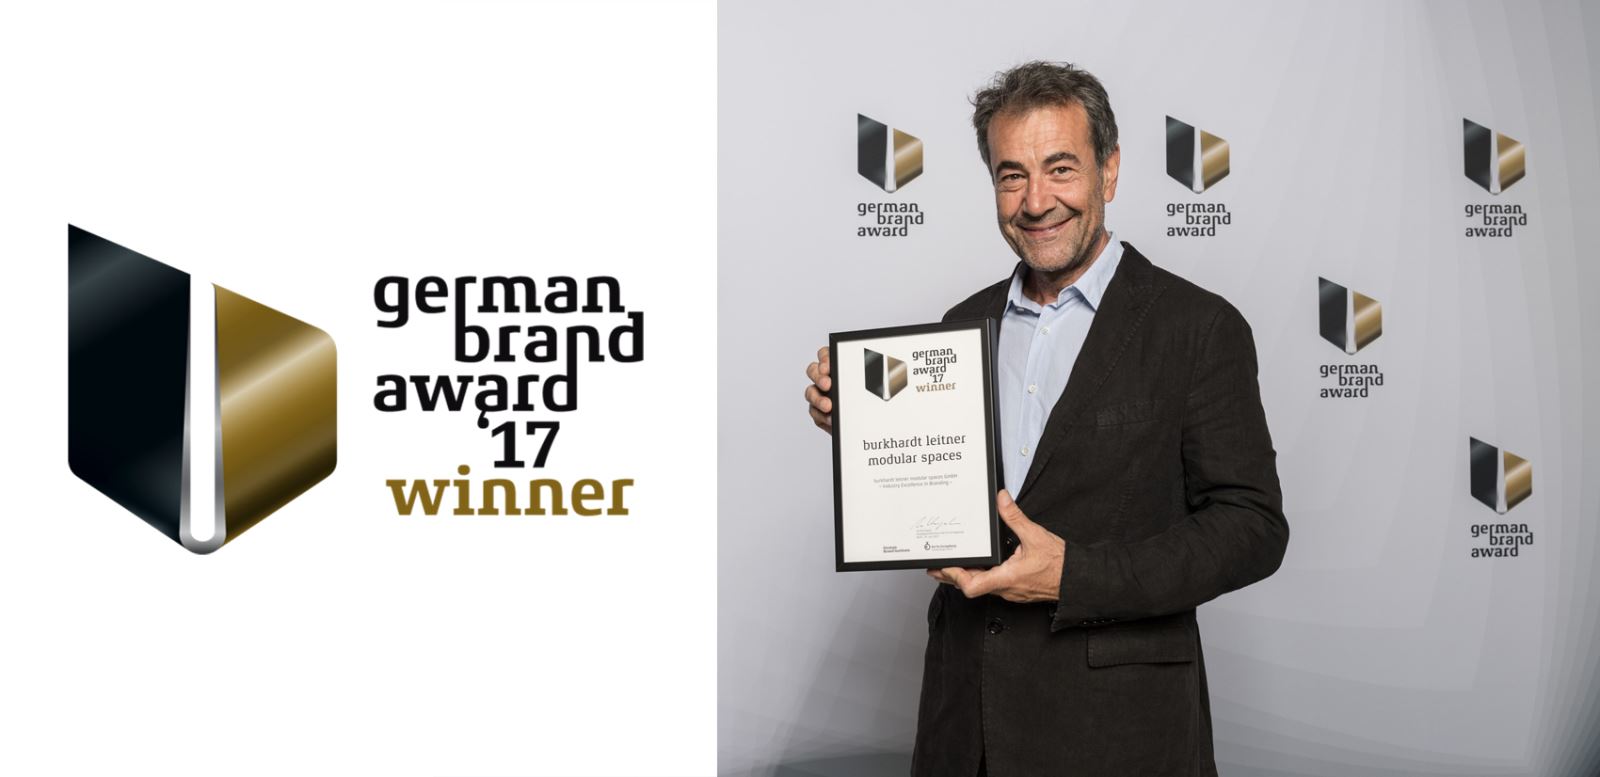 We received the German Brand Award 2017!